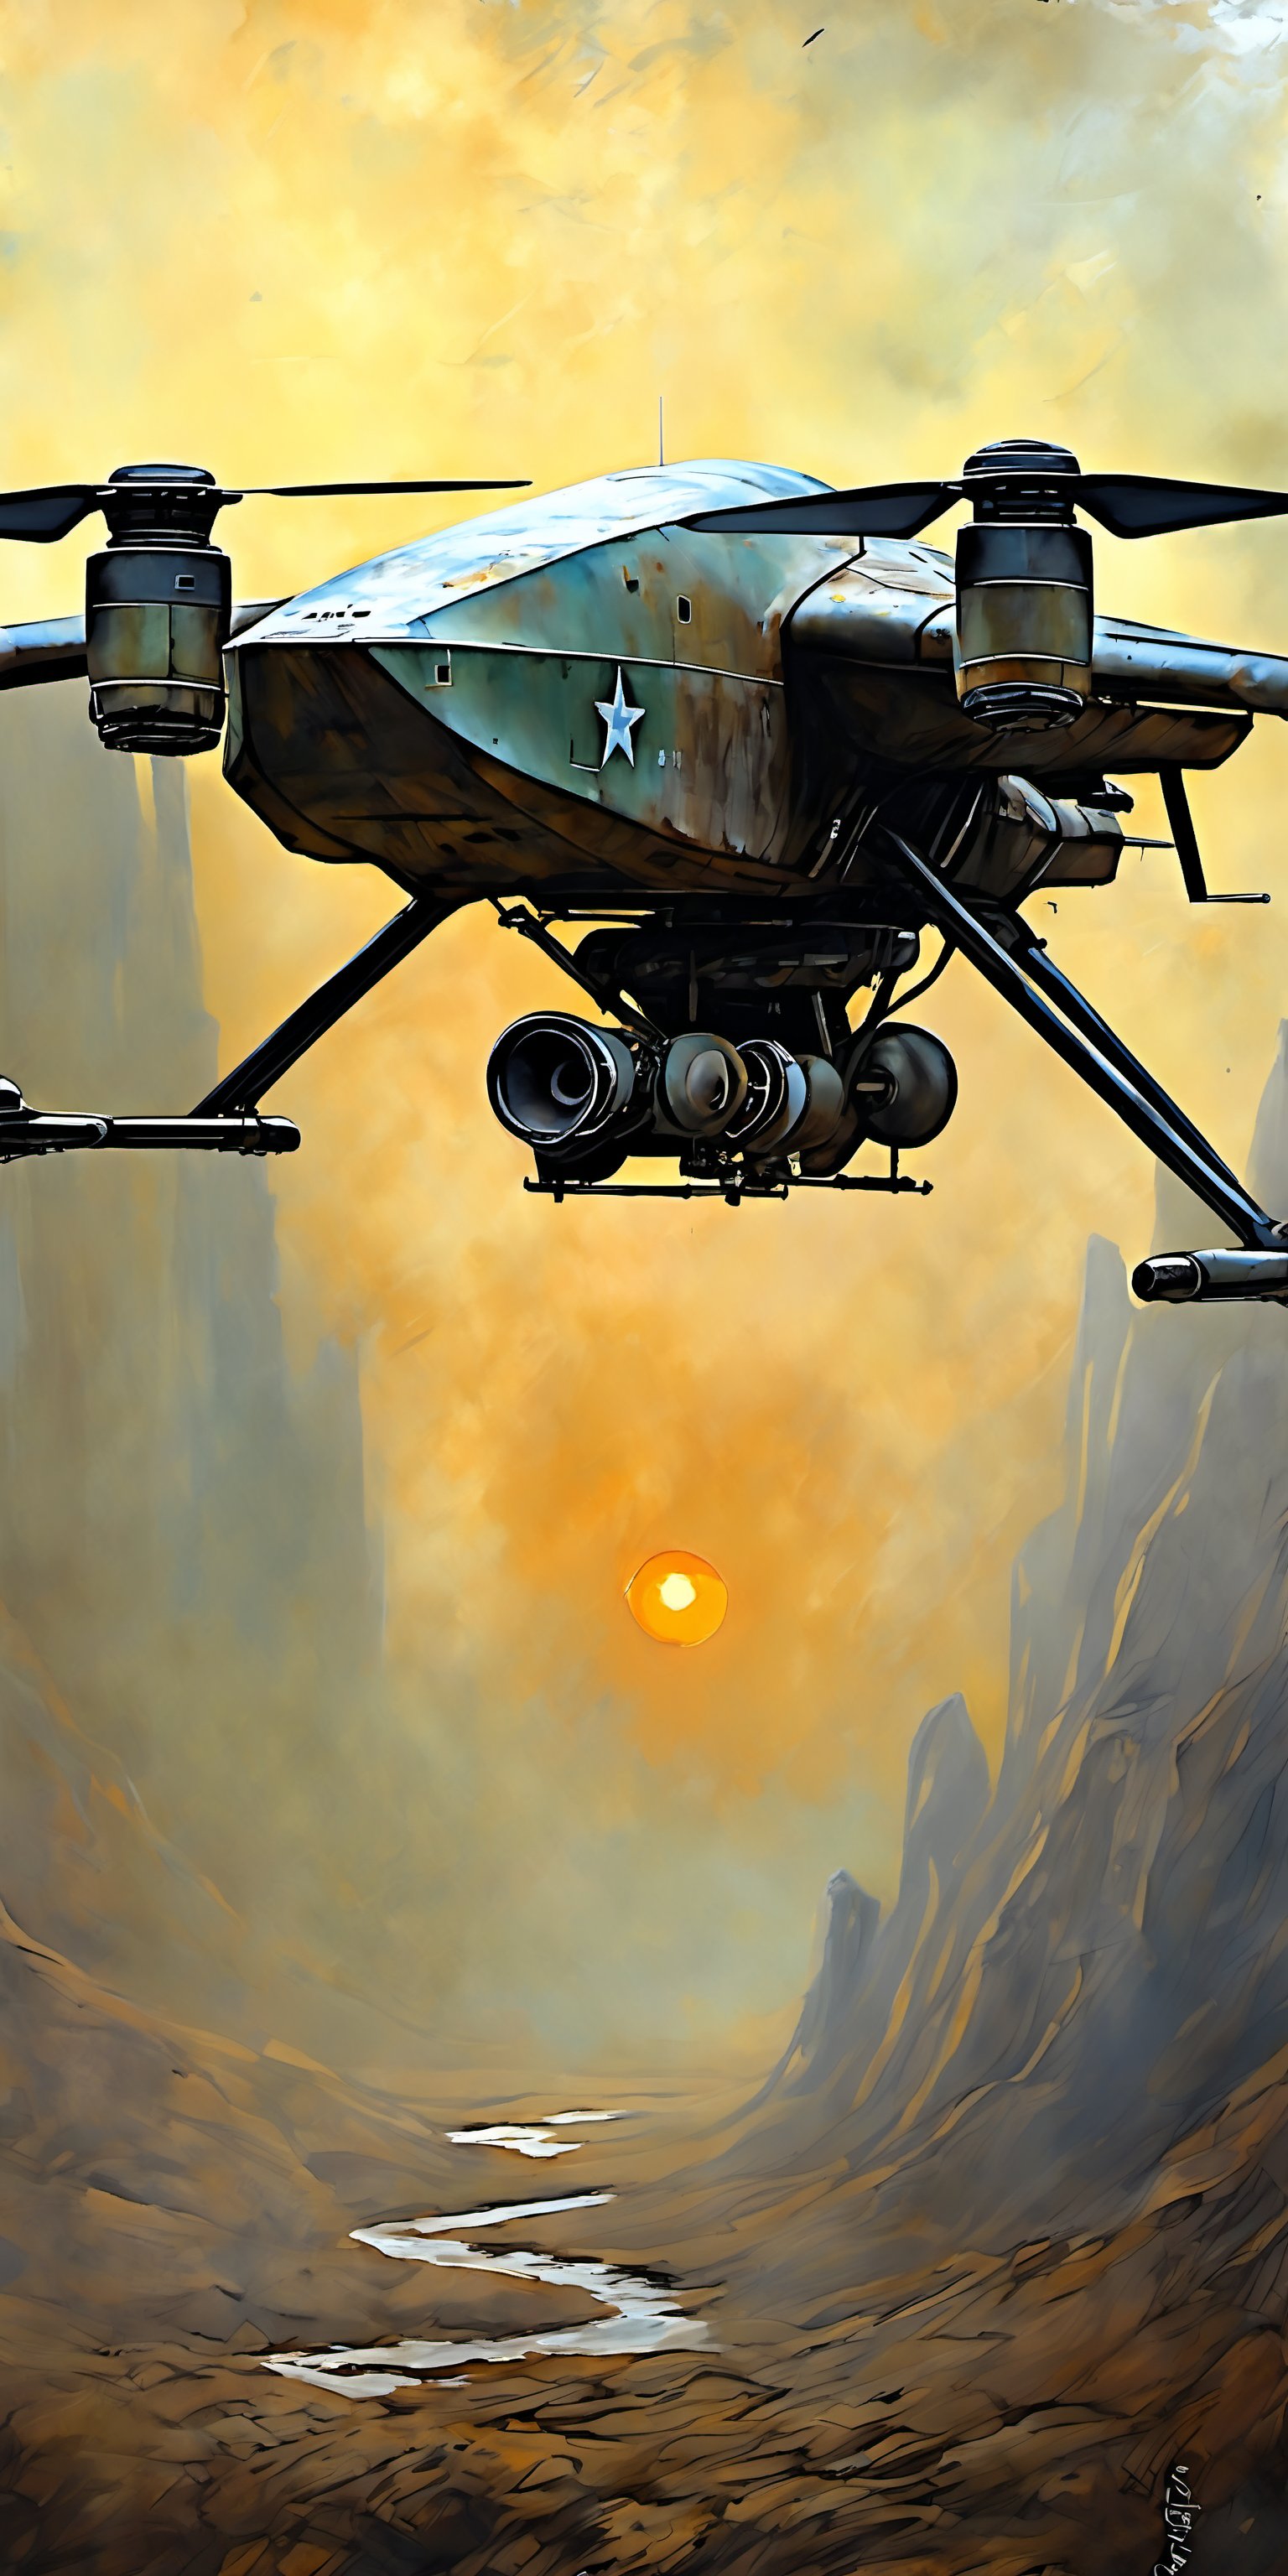 "Create a hyperrealistic oil painting of the worn and aged appearance of a large, weathered military UAV, showing signs of extensive use and time-worn features. The UAV should appear rugged and utilitarian, with dirt-covered equipment and a tattered, worn exterior that stands out. The UAV should be flying high above the terrain. The sky should be ablaze with the soft and diffused colors of a spectacular sunset behind the UAV, casting gentle shadows and creating an ethereal atmosphere. The overall effect is a blend of impressionism and abstraction, creating a rich, immersive setting that complements the hyperrealistic, sharp focus on the worn and aged appearance of the large, weathered UAV. In contrast, the background should transition into an abstract, painterly environment with bold and textured brushstrokes adding depth and movement. The overall effect should capture the immense scale and rugged beauty of the scene, with dramatic lighting emphasizing the textures and features of the UAV. The atmosphere should be hazy and diffuse, contributing to an ethereal and somewhat dystopian feel. Indistinct forms and shapes in the background should suggest a spectacular sunset in the mountains, rendered in a loose, impressionistic style to emphasize mood and atmosphere over detailed realism. Use a muted color palette with cooler tones such as grays, blues, and greens to create depth and atmosphere. Use muted shades of earthy tones to depict worn, weathered and aged appearances. Use muted accents like rusty orange-yellows and rusty teals to highlight tiny areas and add visual interest. Use this blend of subdued and bold colors to emphasize the gritty nature of the scene."